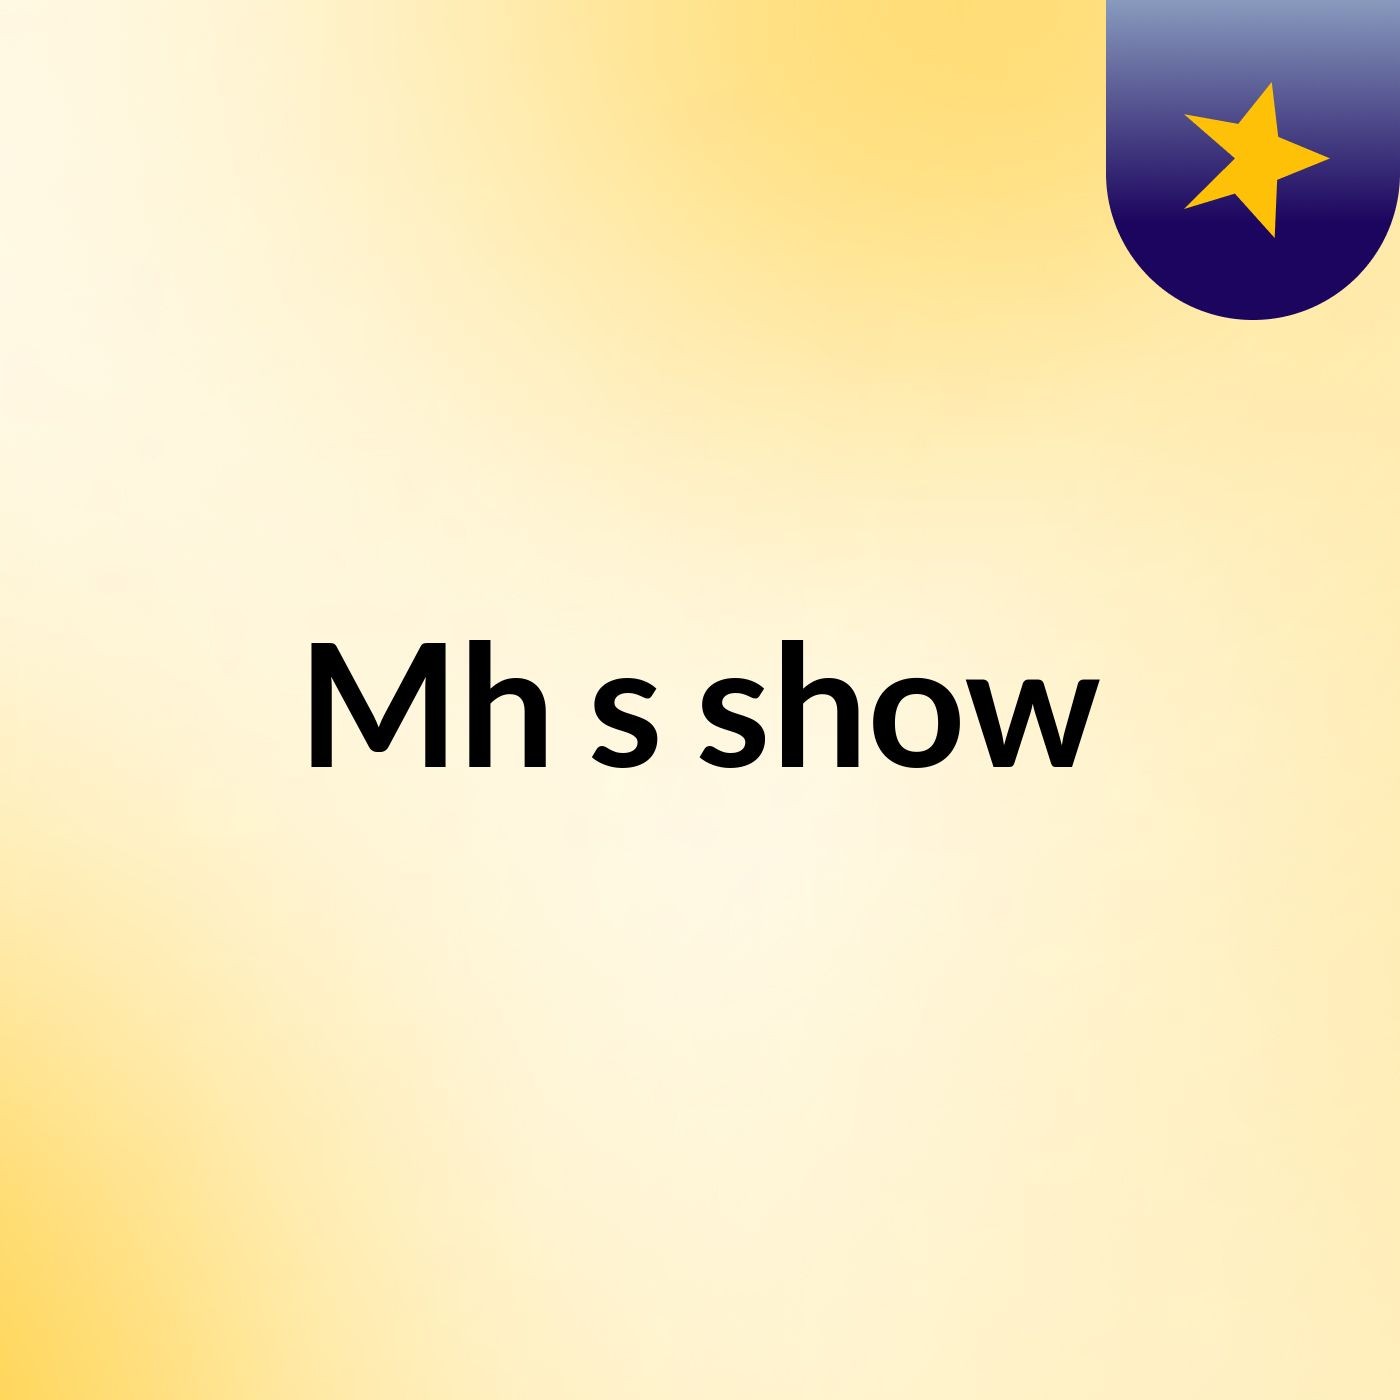 Mh's show